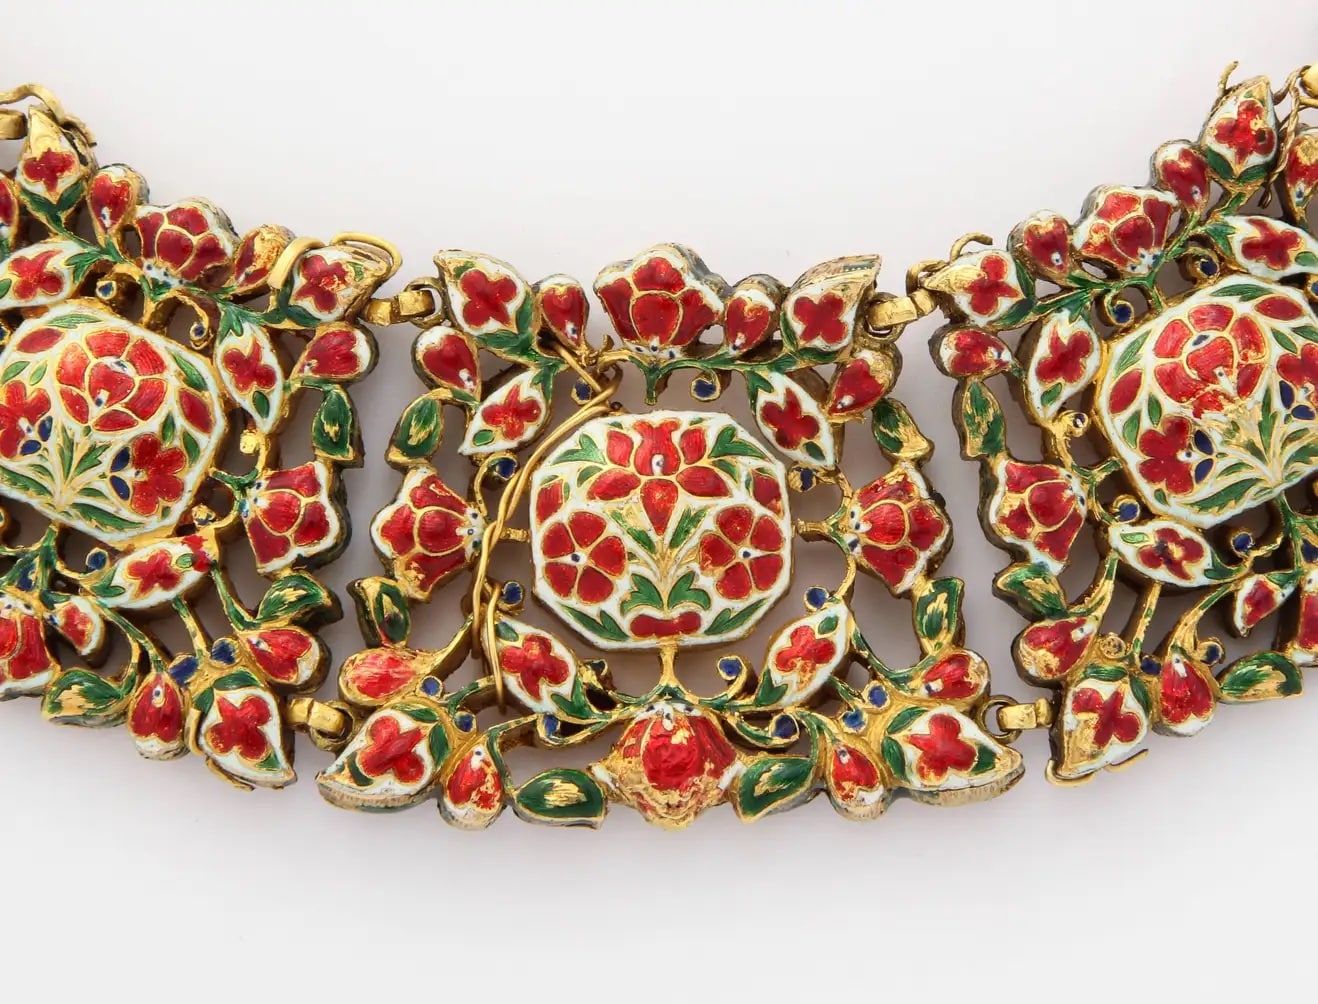 The enamel detail on the back of an antique Mughal Indian spinel, diamond and enamel necklace, ca. 1800, offered by Joseph Saidian and Sons